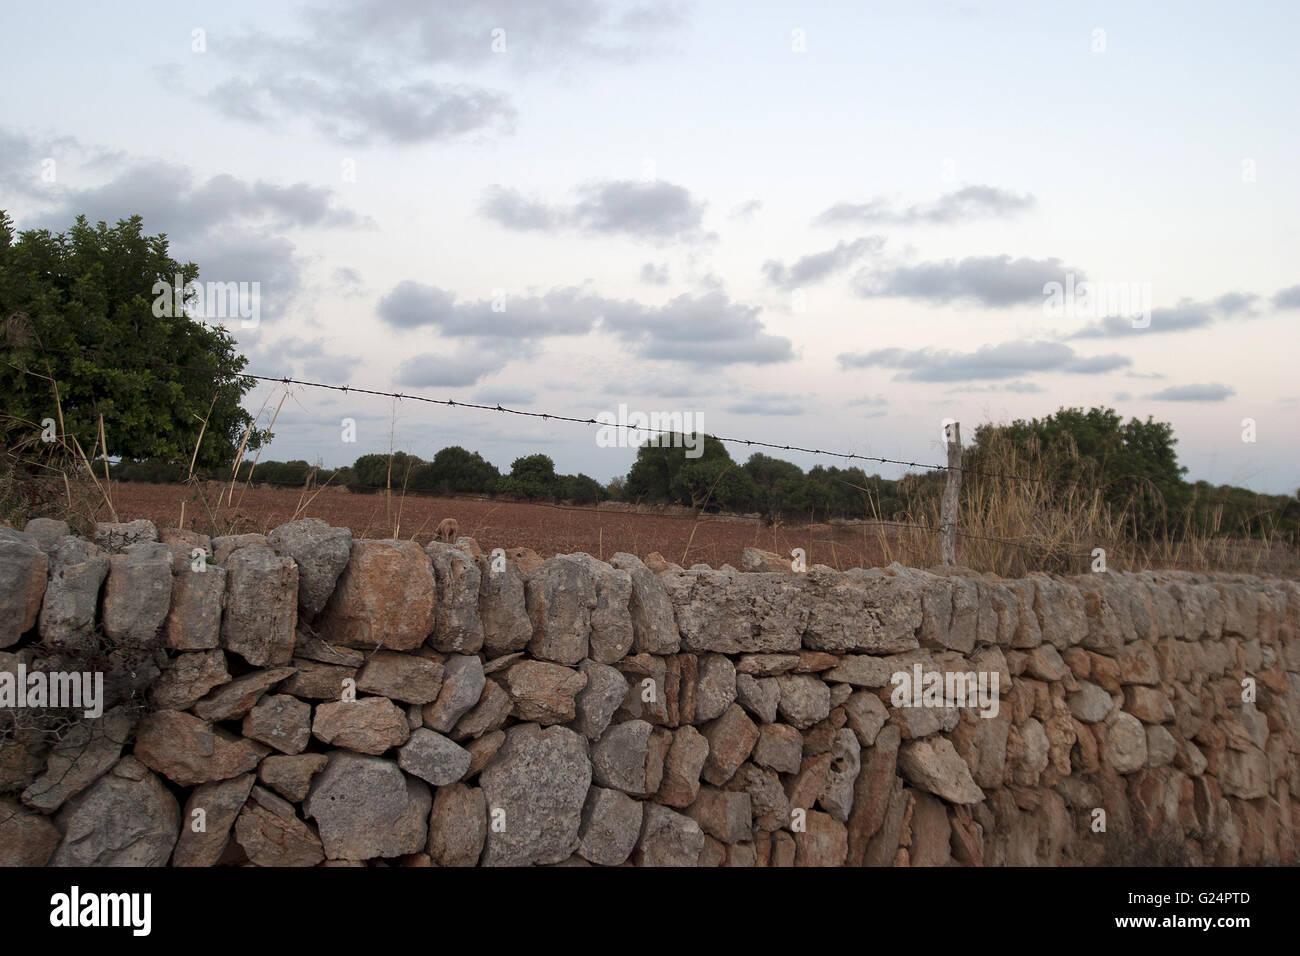 a beautiful photo of an ancient stone wall in Palma de Mallorca, with a field and trees in the background Stock Photo